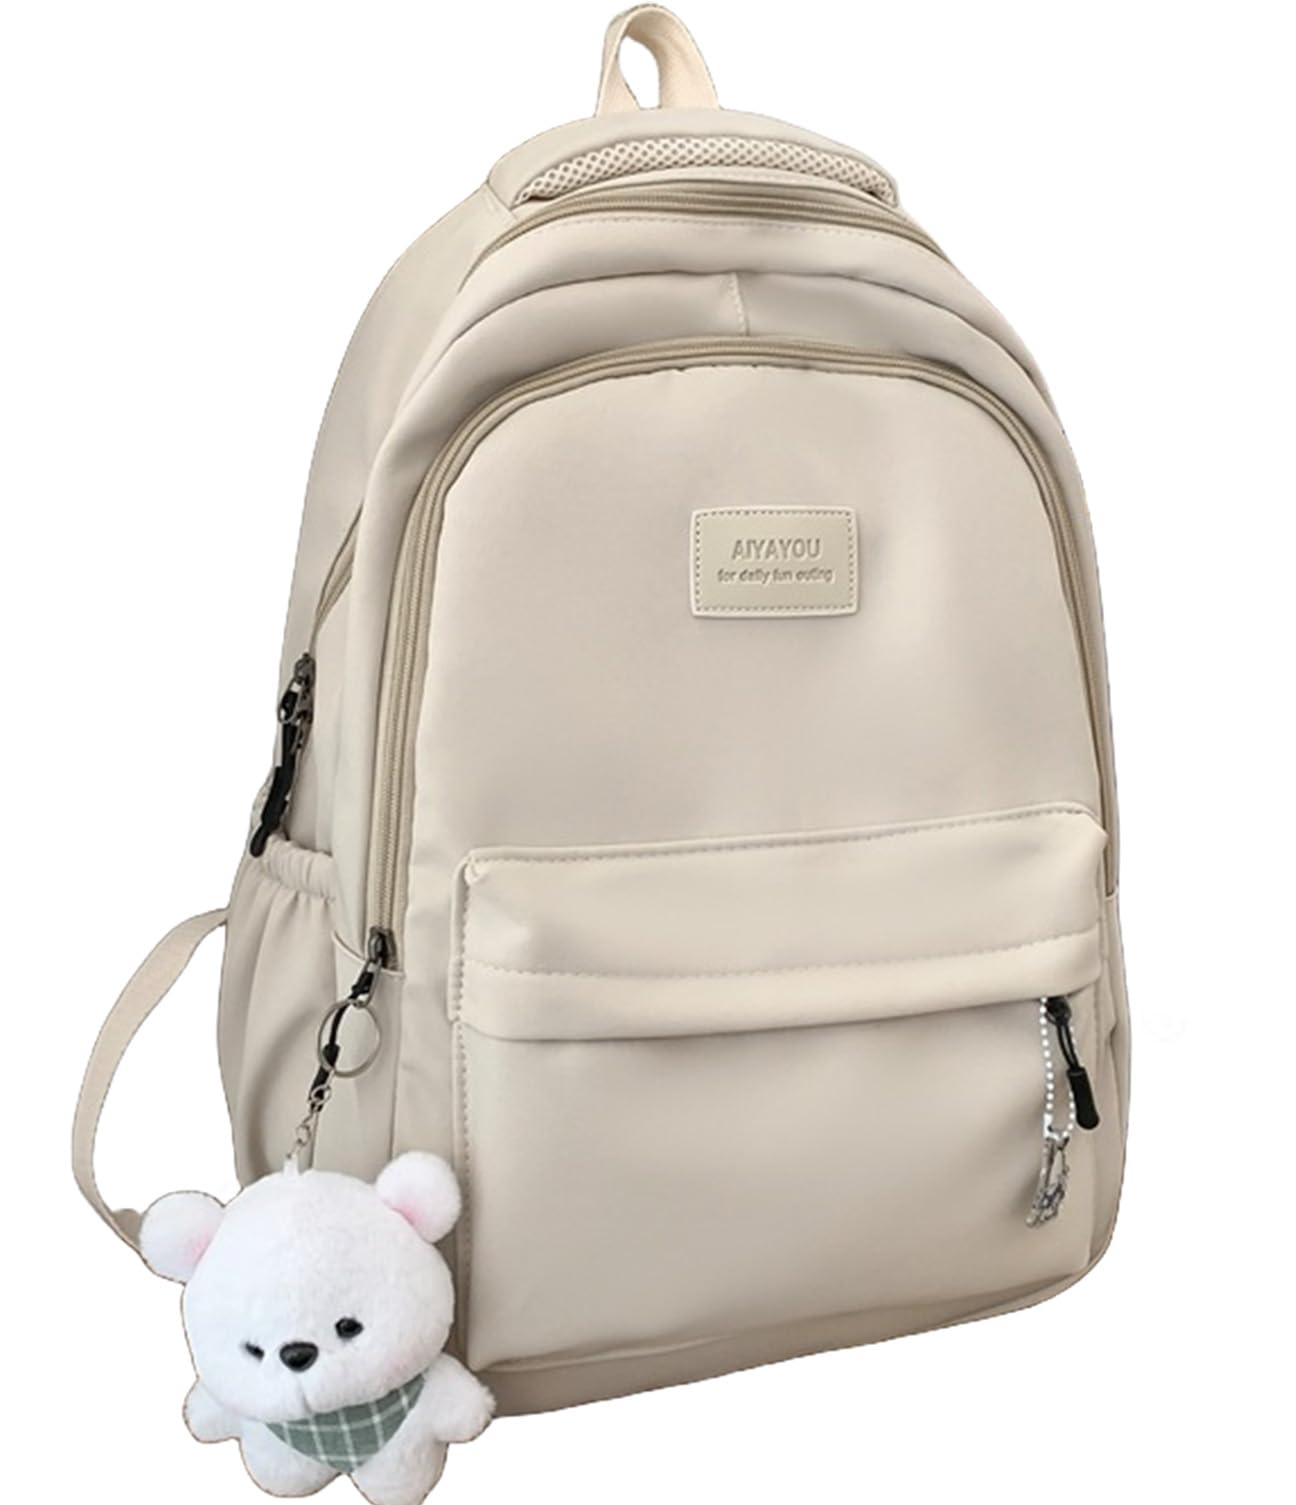 GRYPIT Kawaii Cute Aesthetic Backpack with Cute Accessory Cute Bag Charm (Stone White)